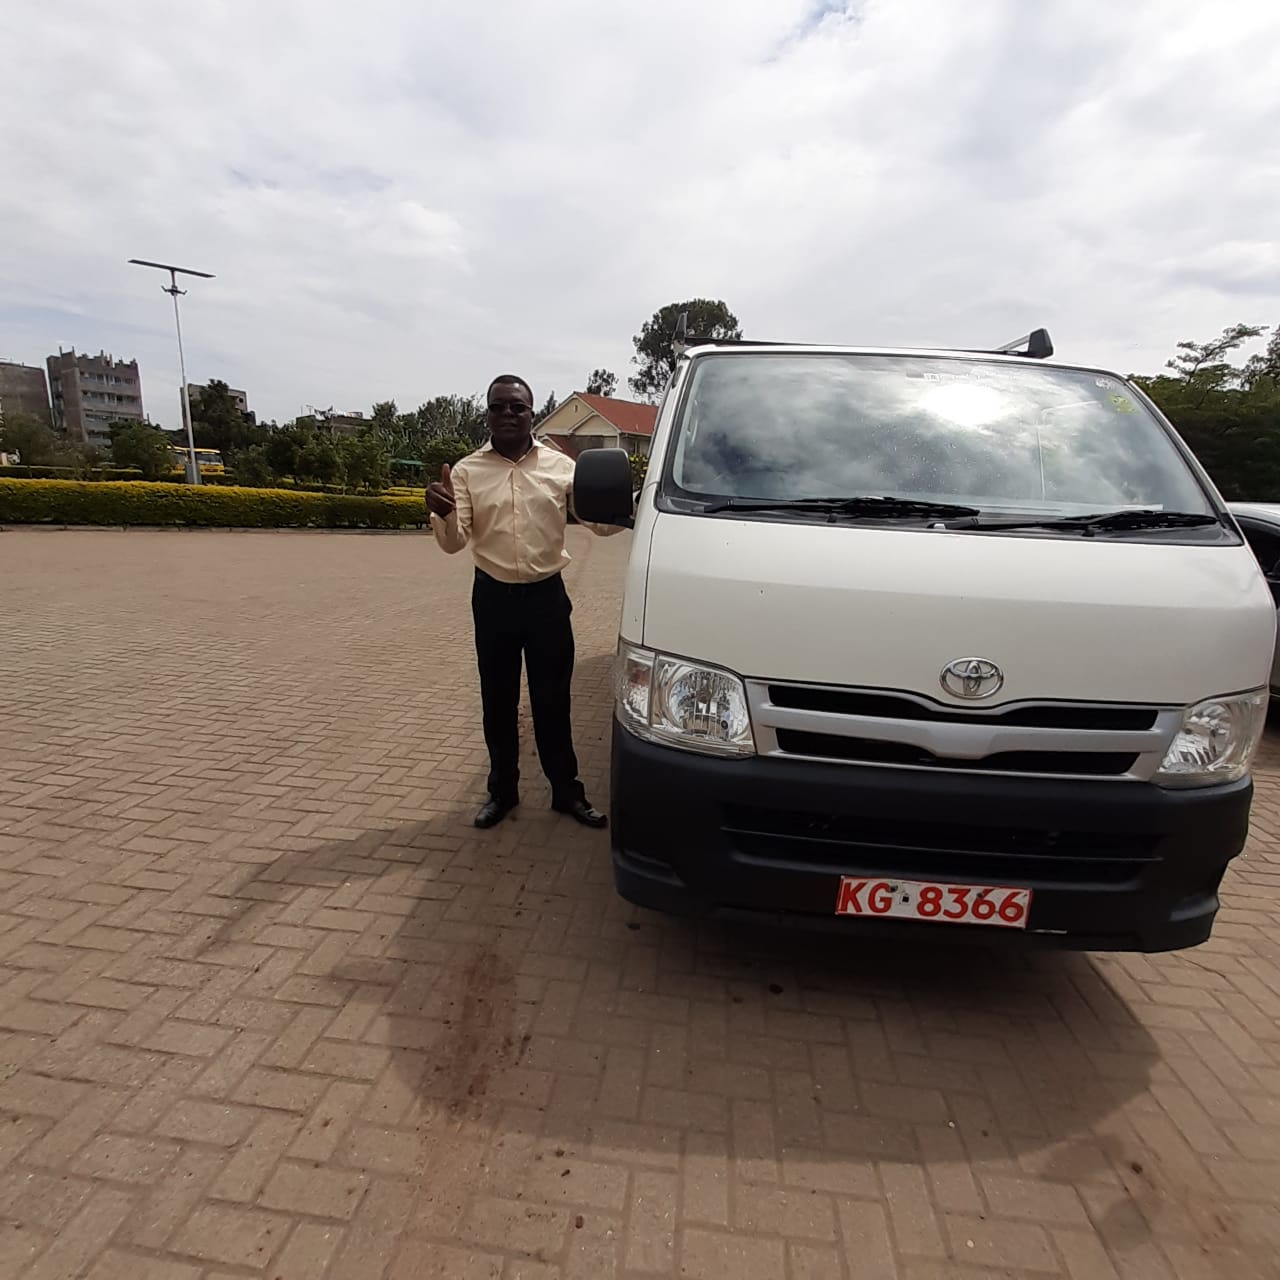 2013 TOYOTA HIACE VAN,  Got the Hiace. It is nice. Thank you very much for the unit and good price also.